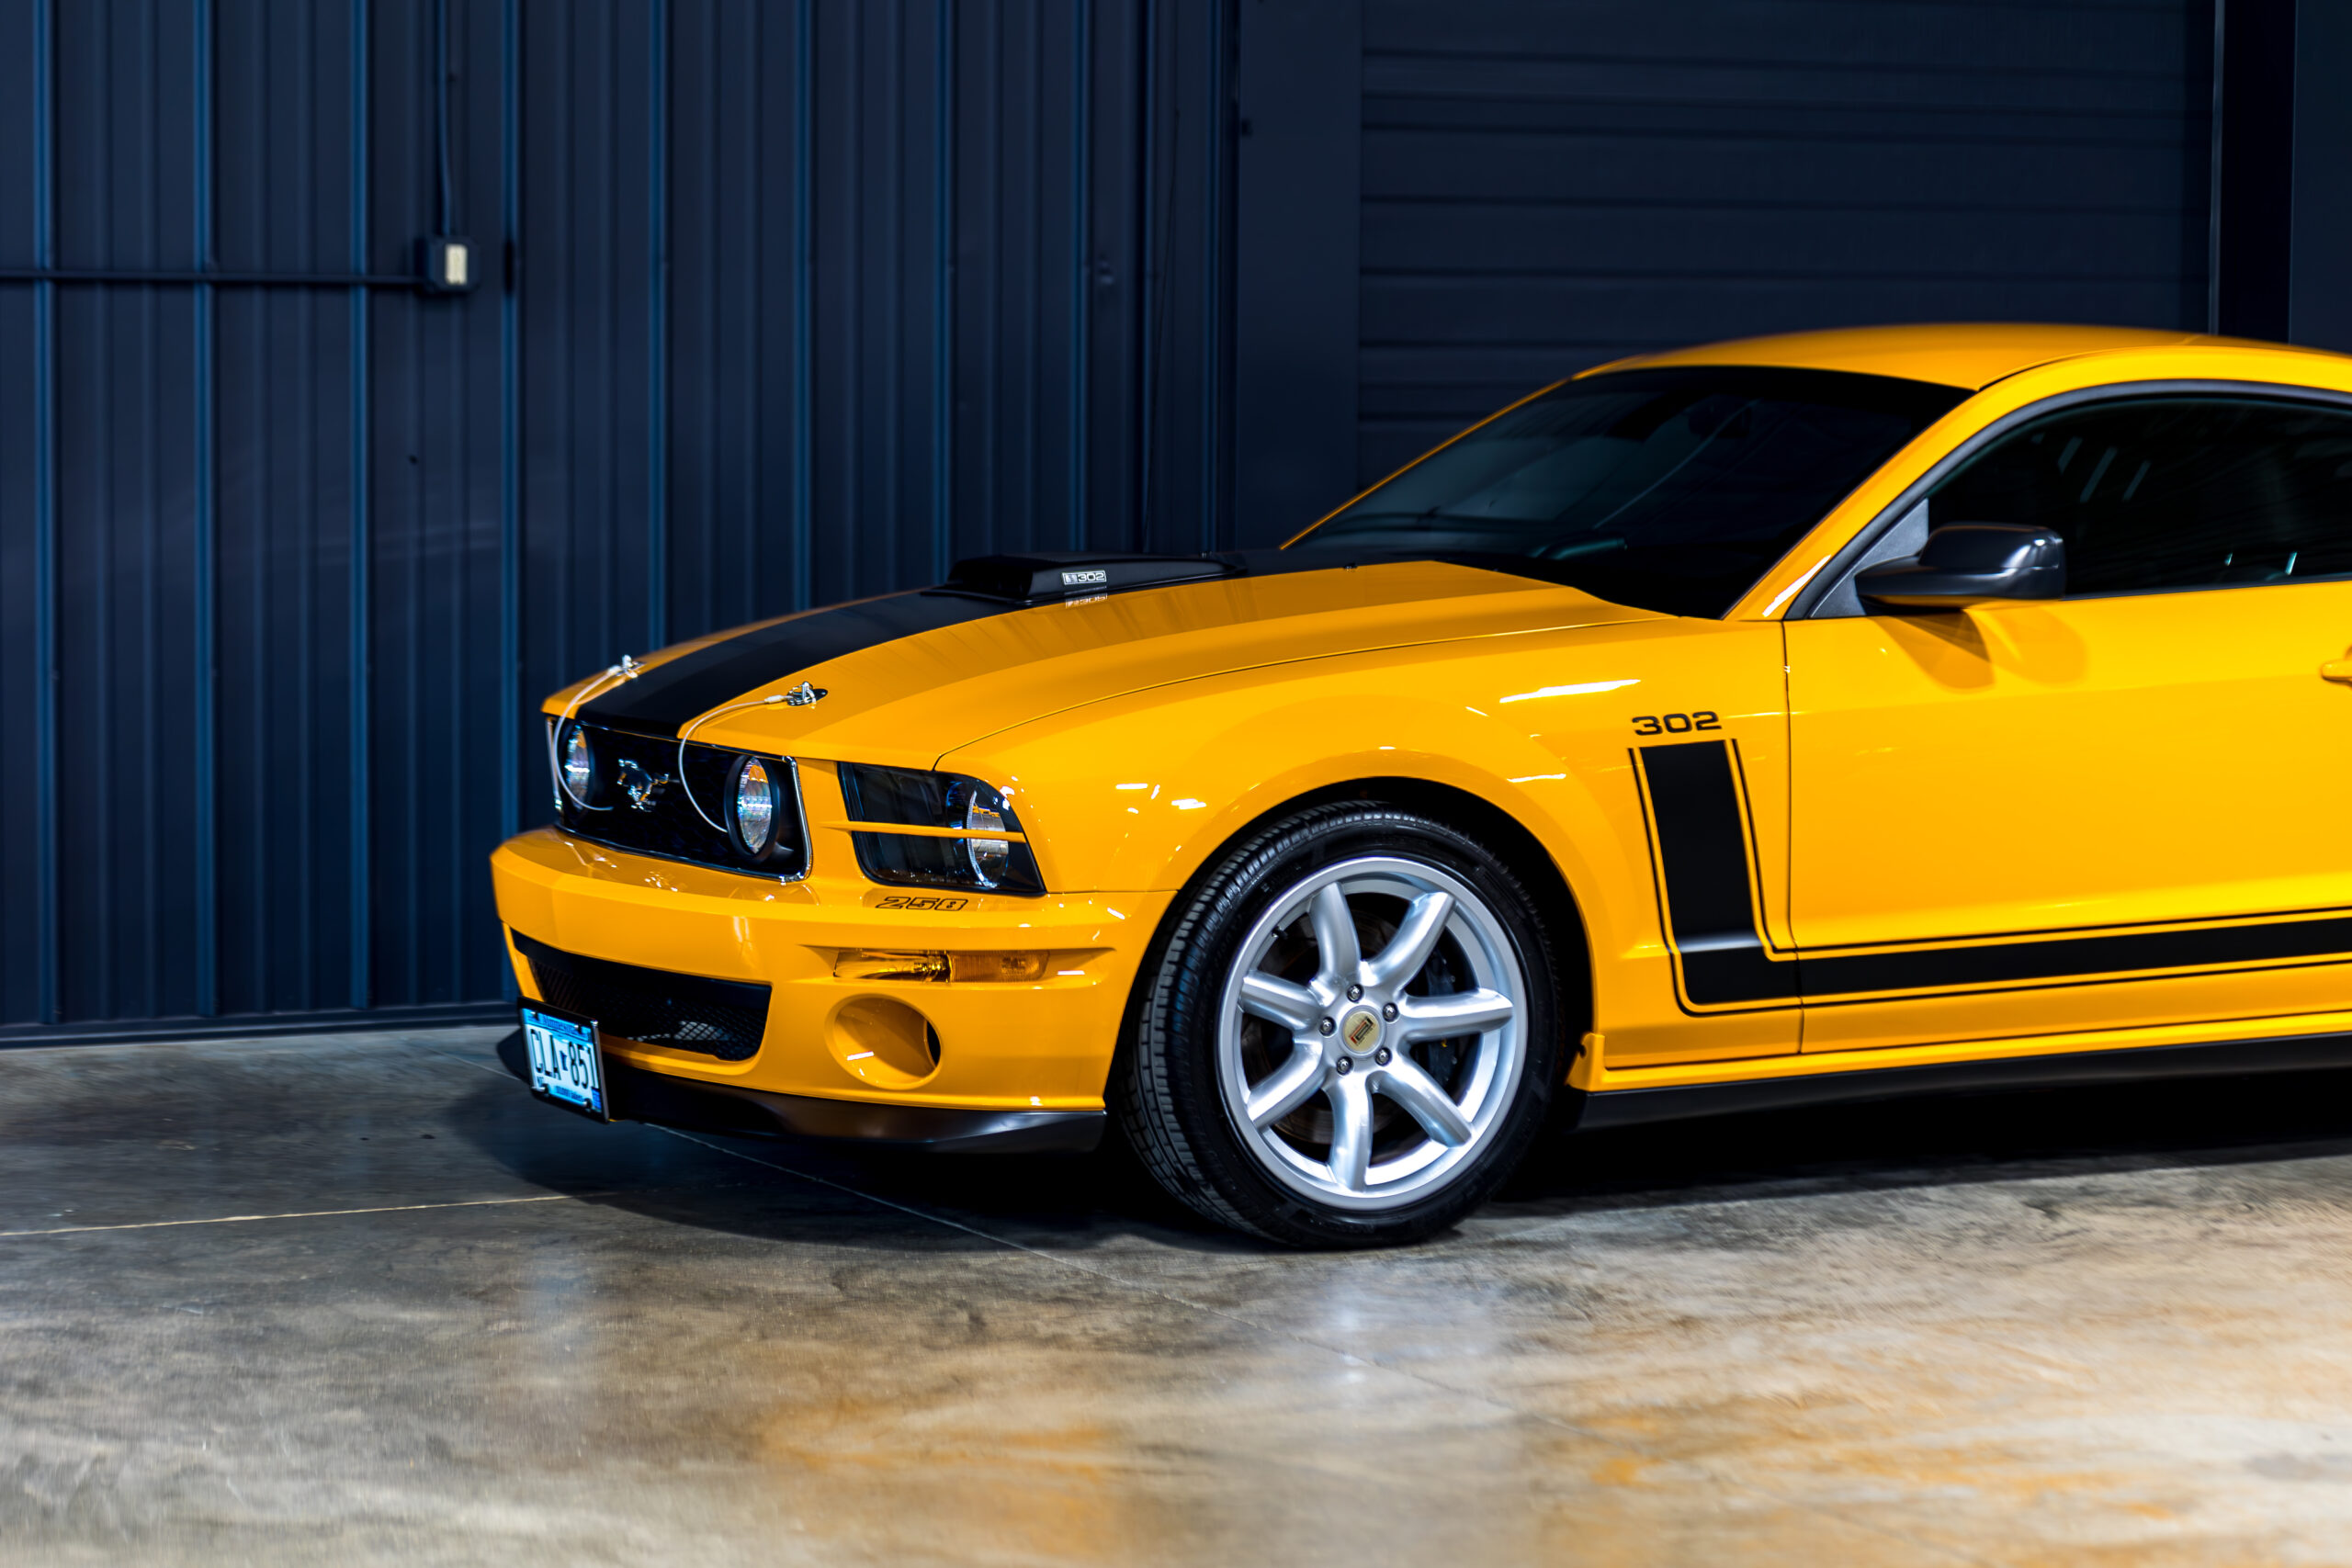 A 2007 Saleen Parnelli Jones Mustang gleaming with a flawless finish, courtesy of paint correction and ceramic coating.